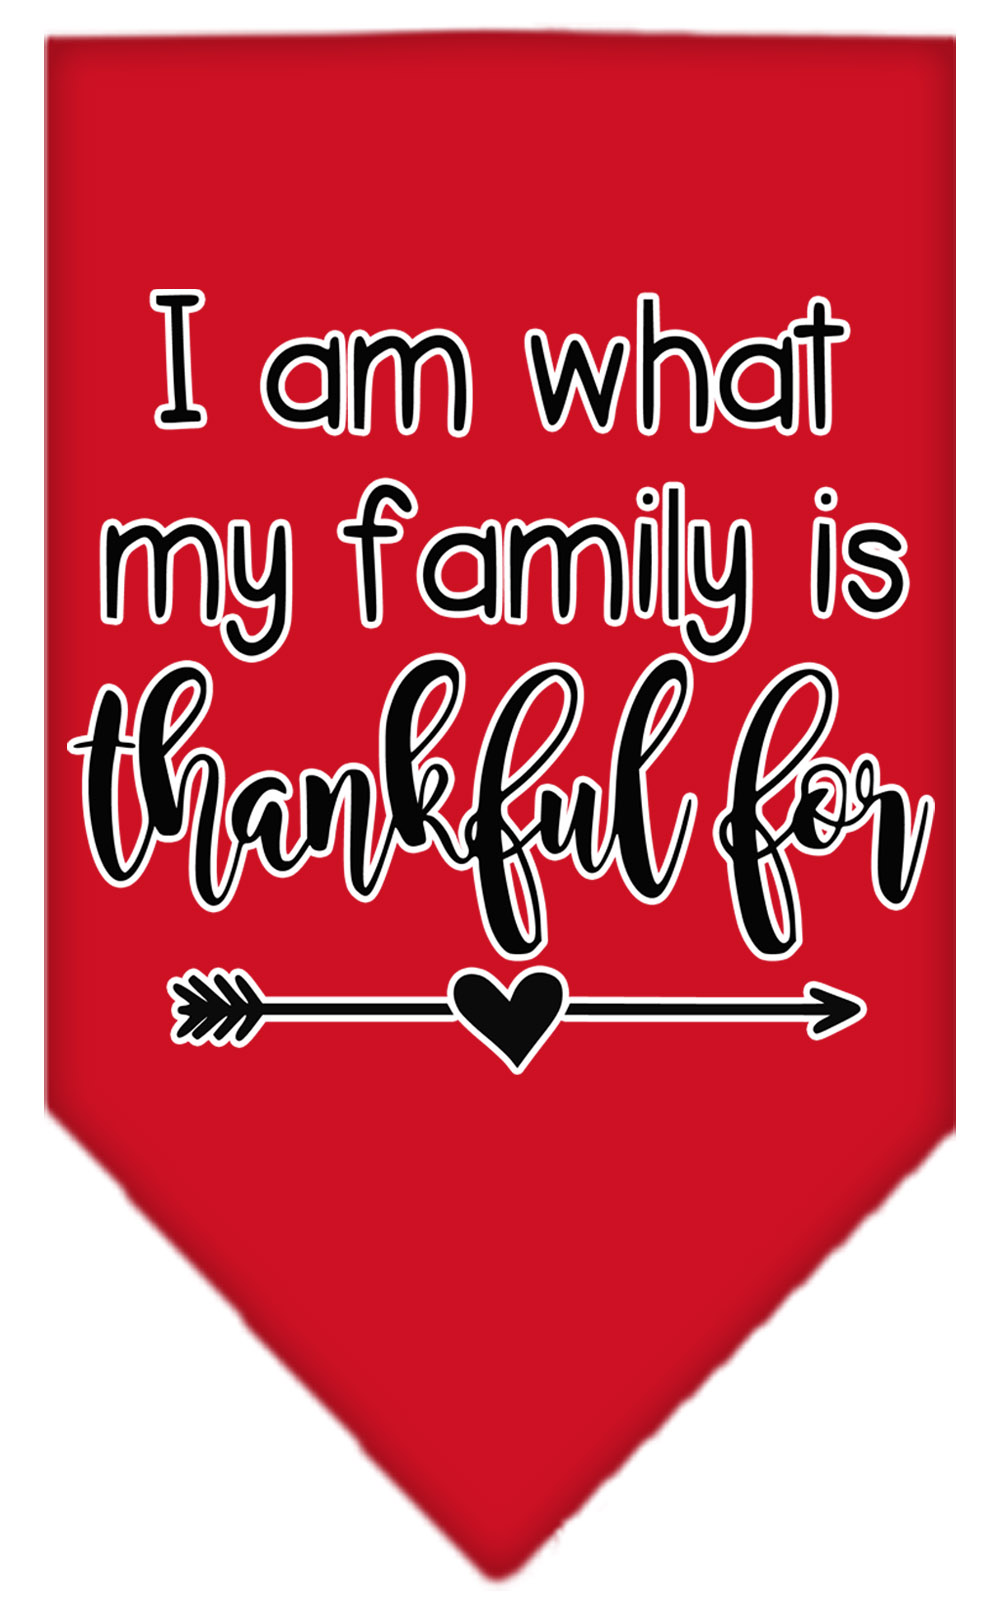 I Am What My Family is Thankful For Screen Print Bandana Red Large